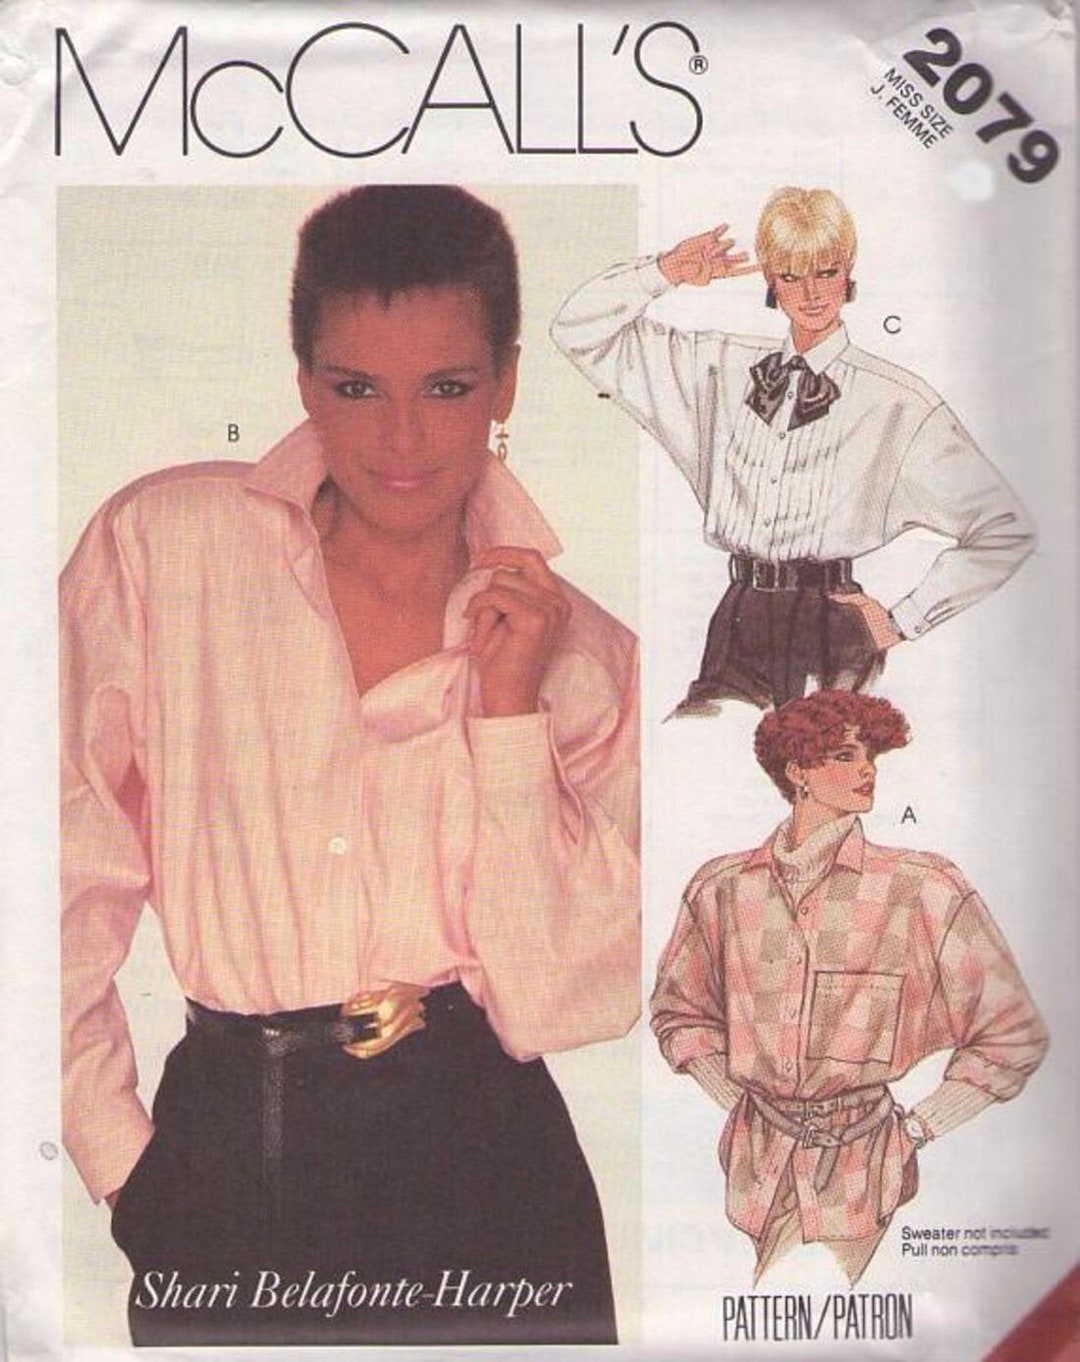 Mccall's 2079 Sewing Pattern vintage UNCUT - Etsy